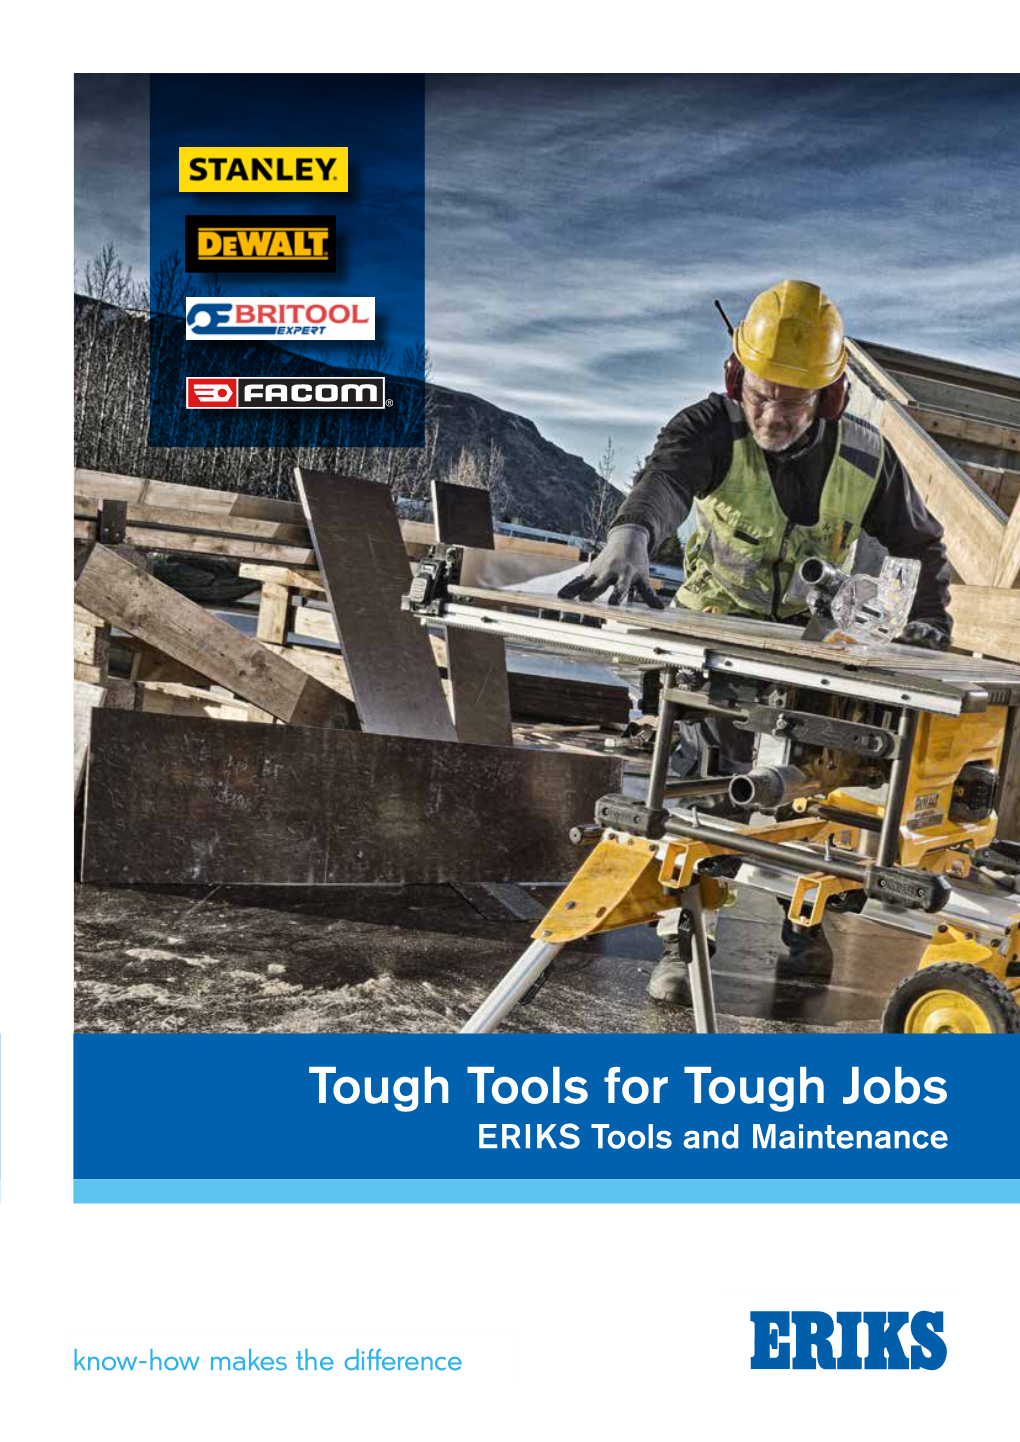 ERIKS Tools and Maintenance: Tough Tools for Tough Jobs